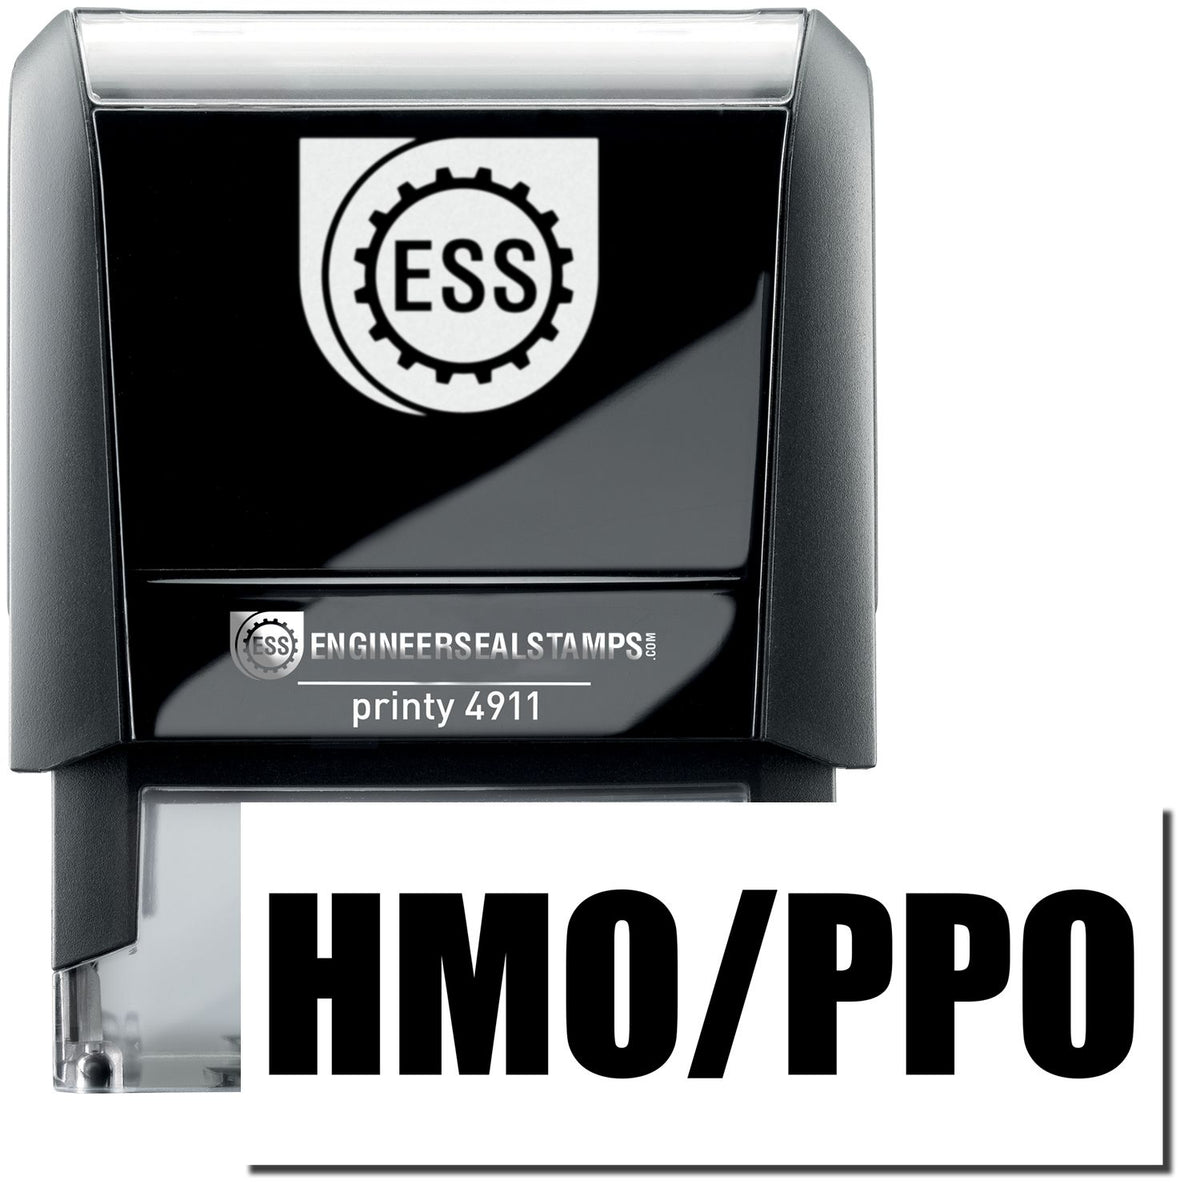 A self-inking stamp with a stamped image showing how the text &quot;HMO/PPO&quot; is displayed after stamping.